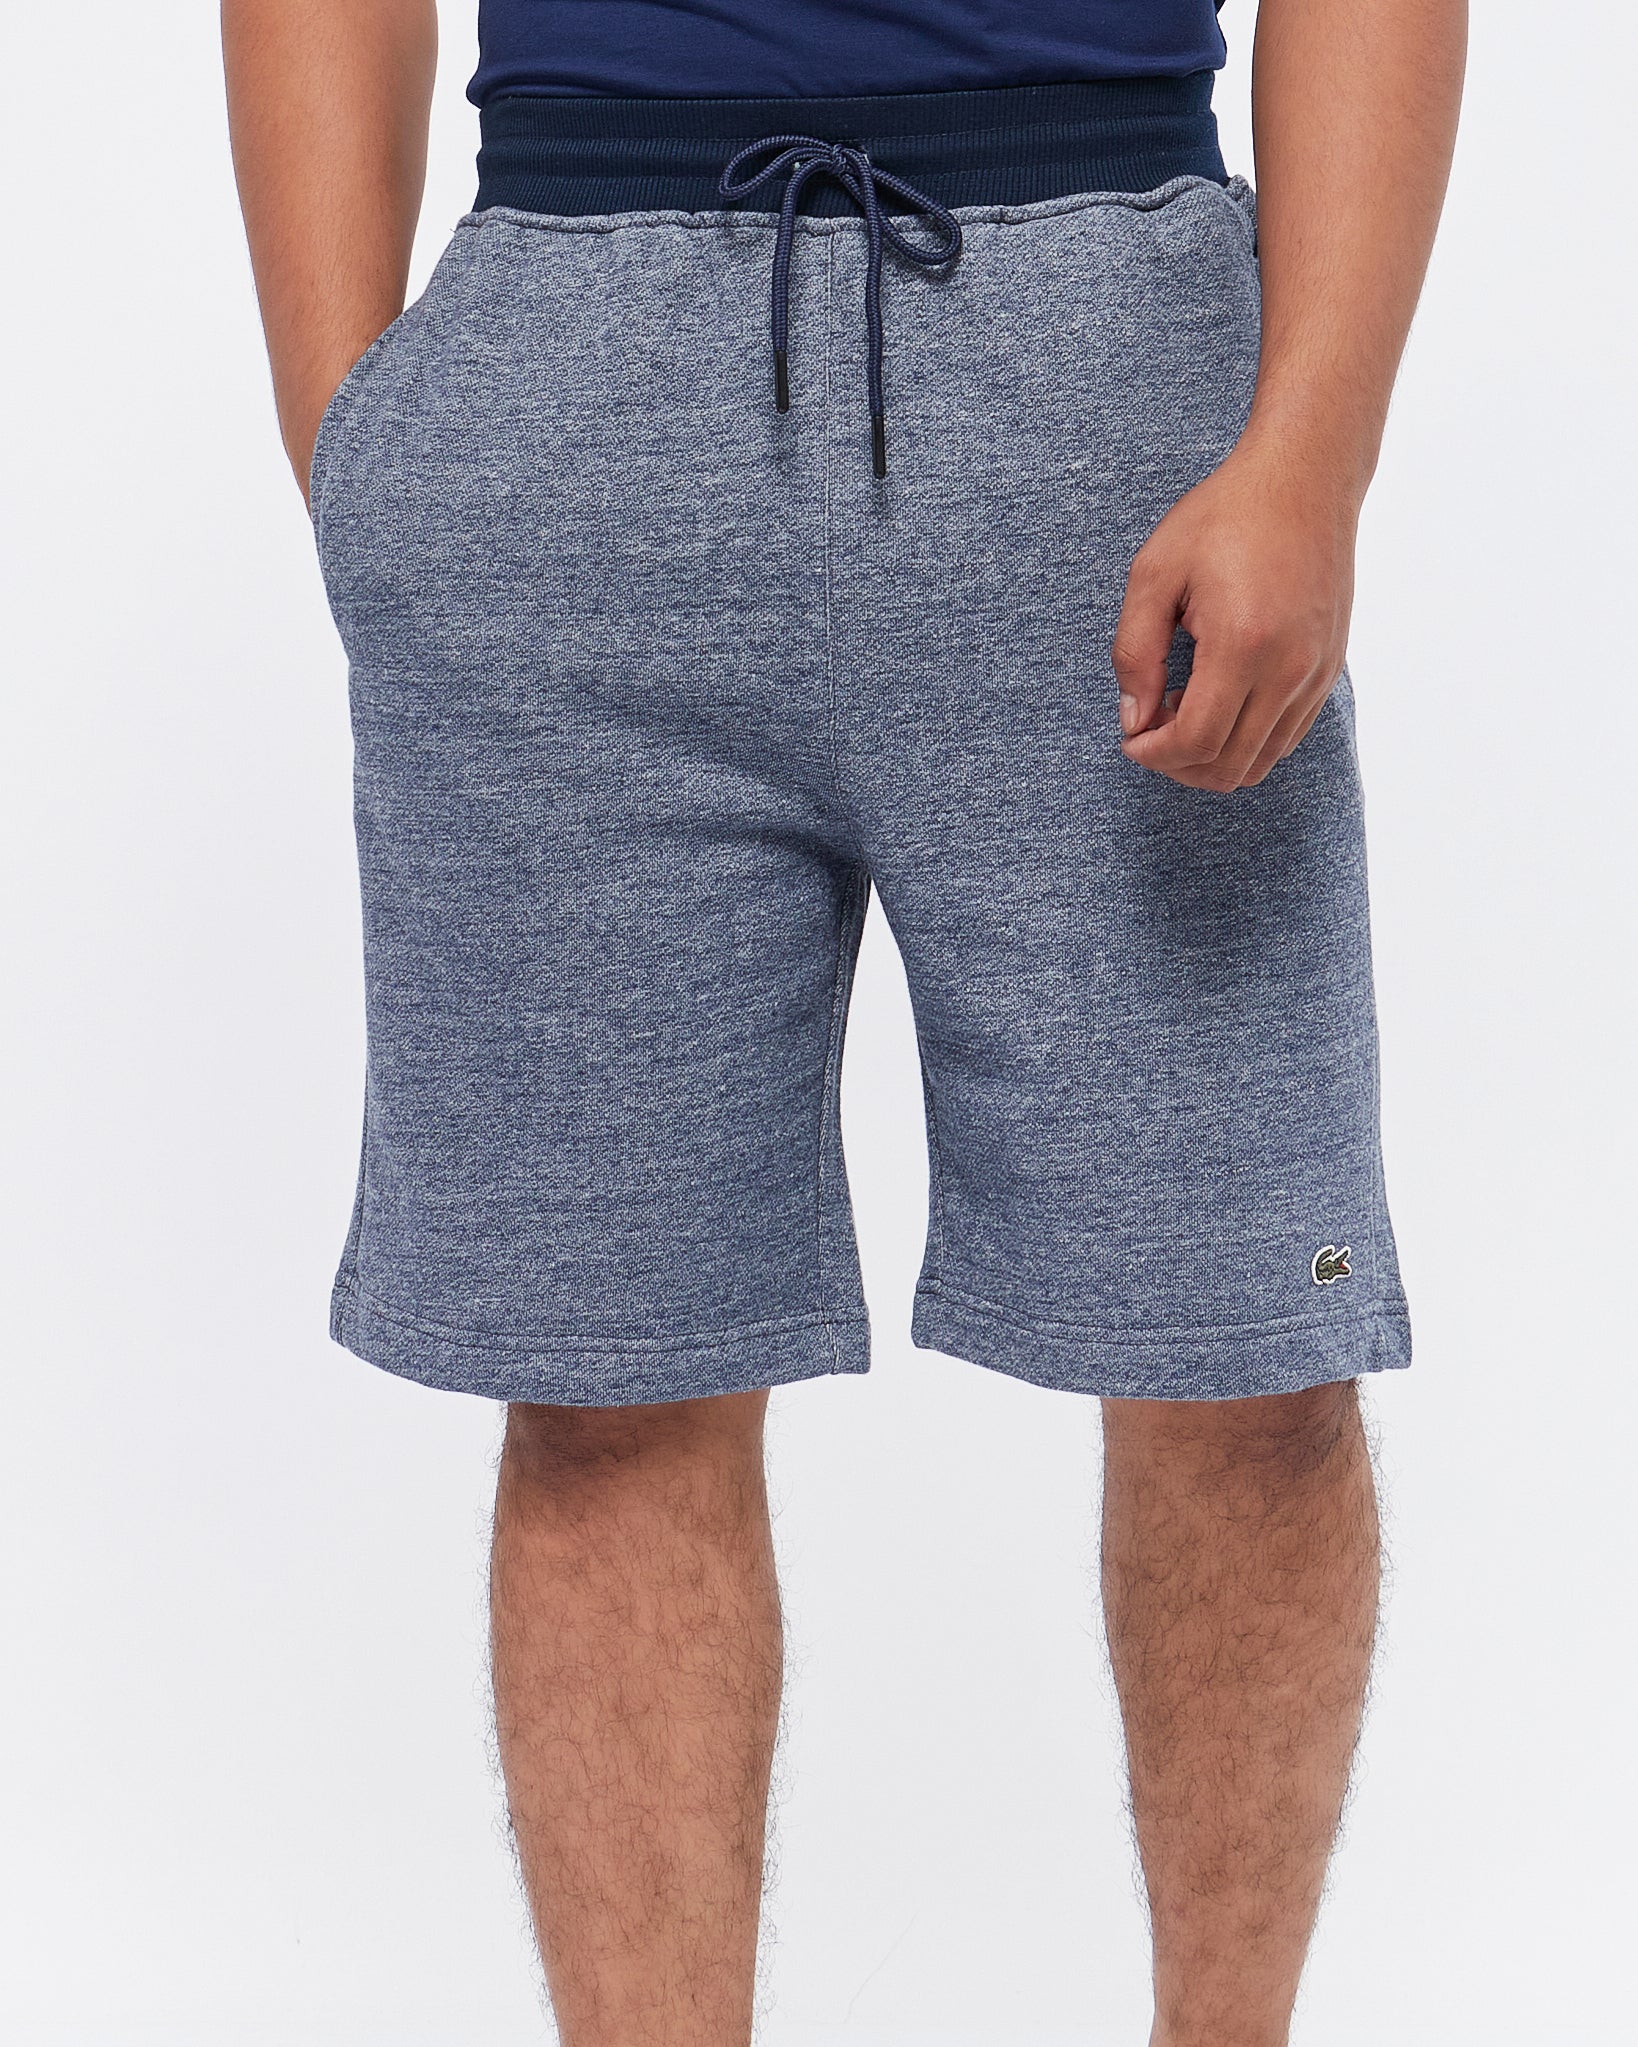 MOI OUTFIT-Elastic Relax Fit Men Short 14.90